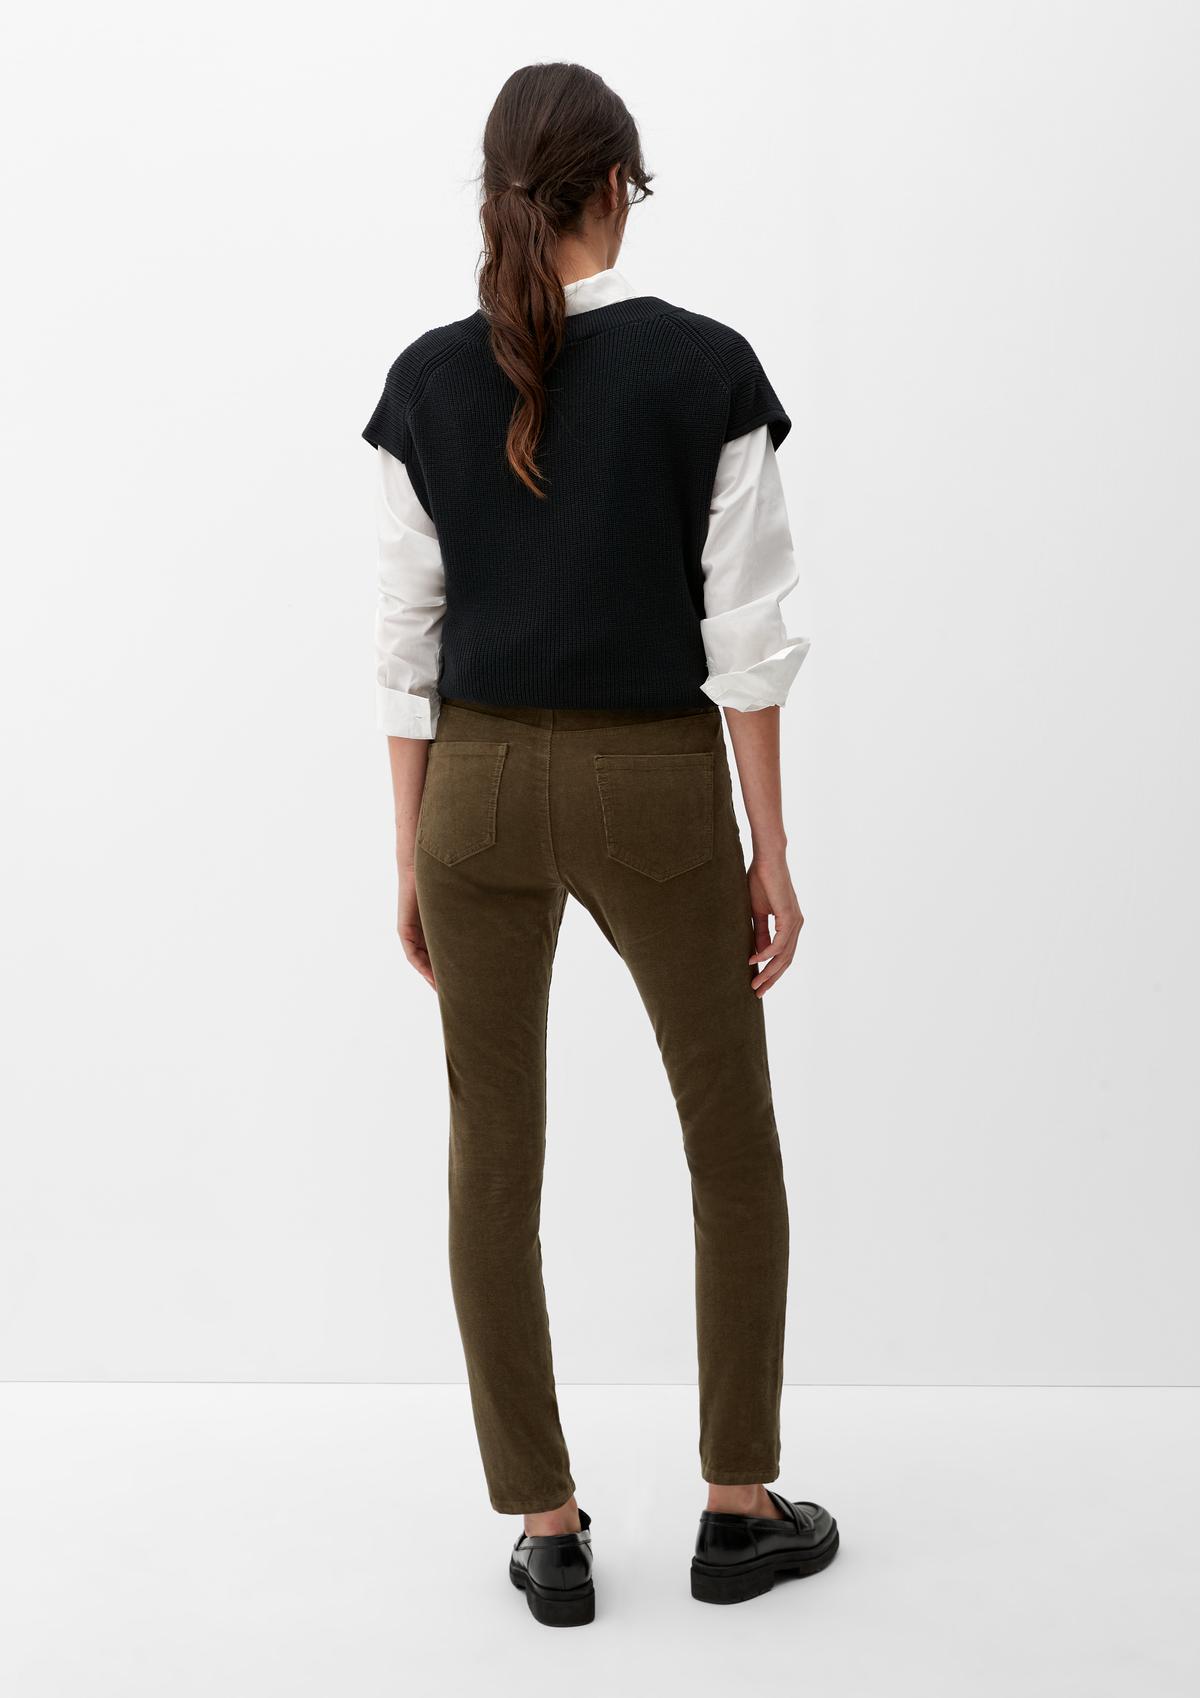 s.Oliver Slim fit: needlecord trousers